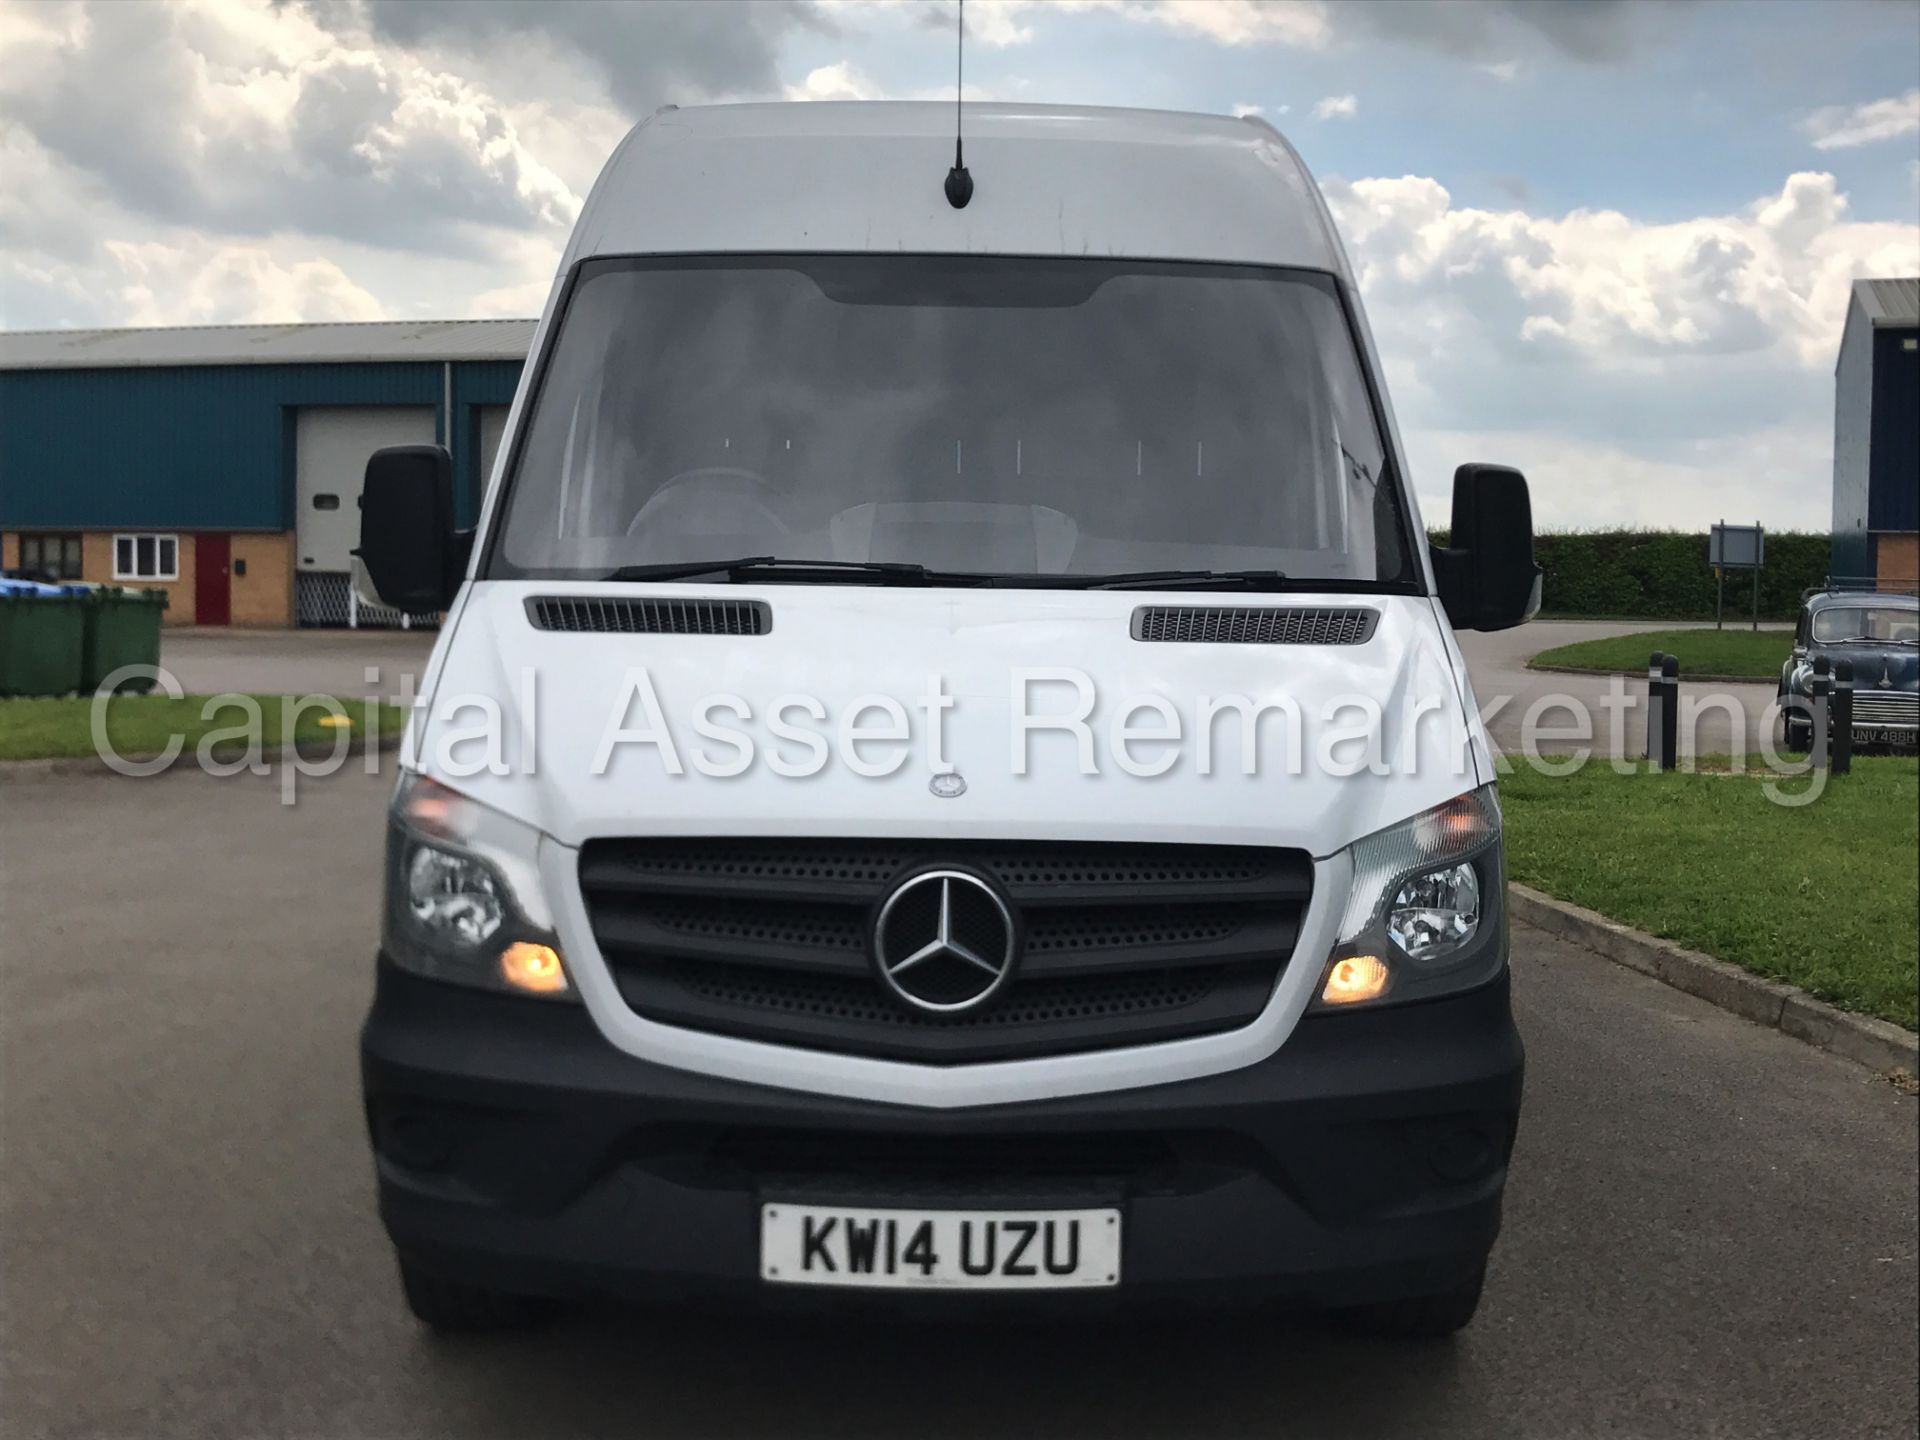 MERCEDES-BENZ SPRINTER 313 CDI 'MWB HI-ROOF' (2014) '130 BHP - 6 SPEED' (1 COMPANY OWNER FROM NEW) - Image 2 of 22